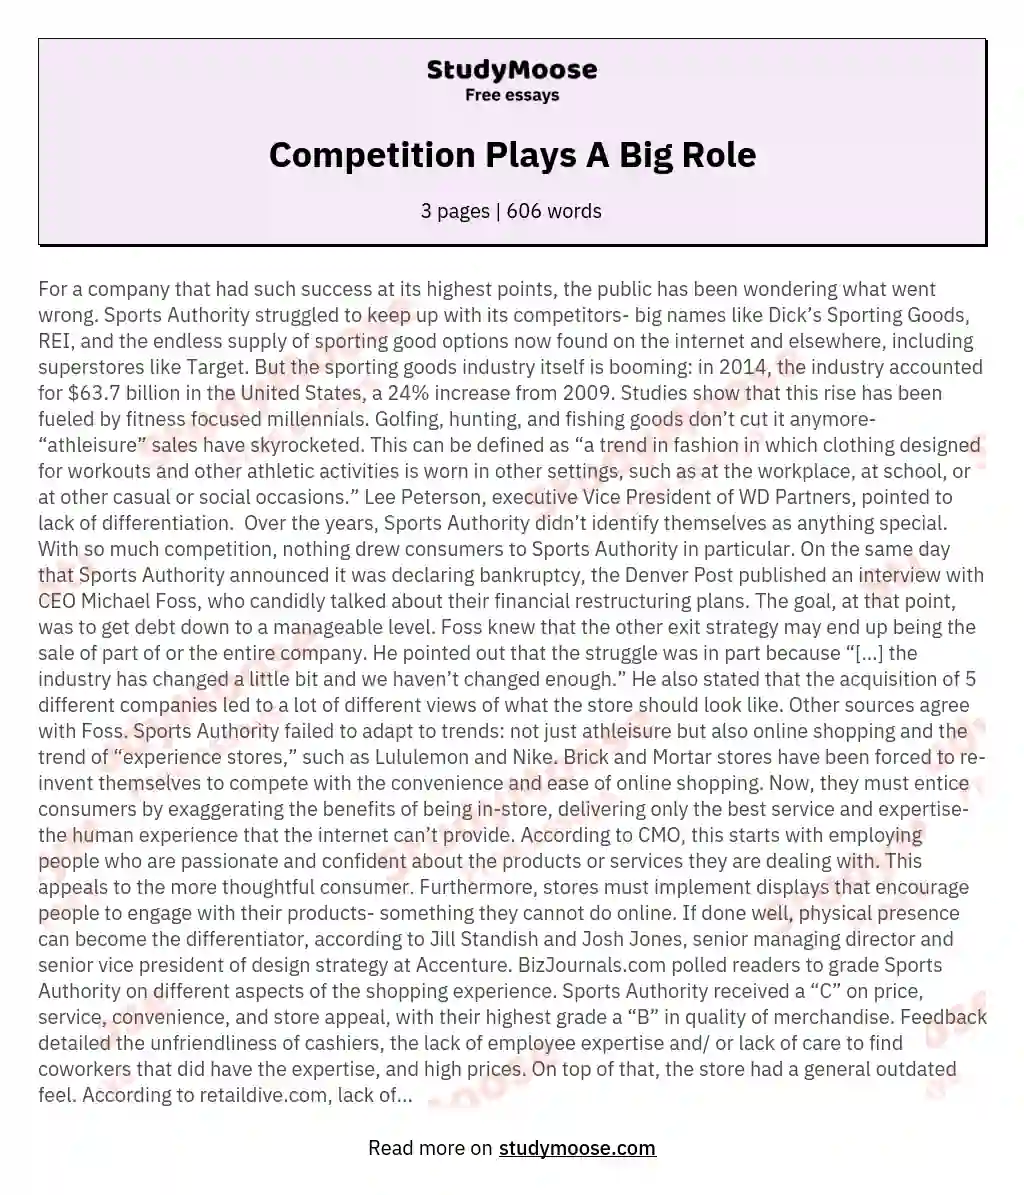 Competition Plays A Big Role essay